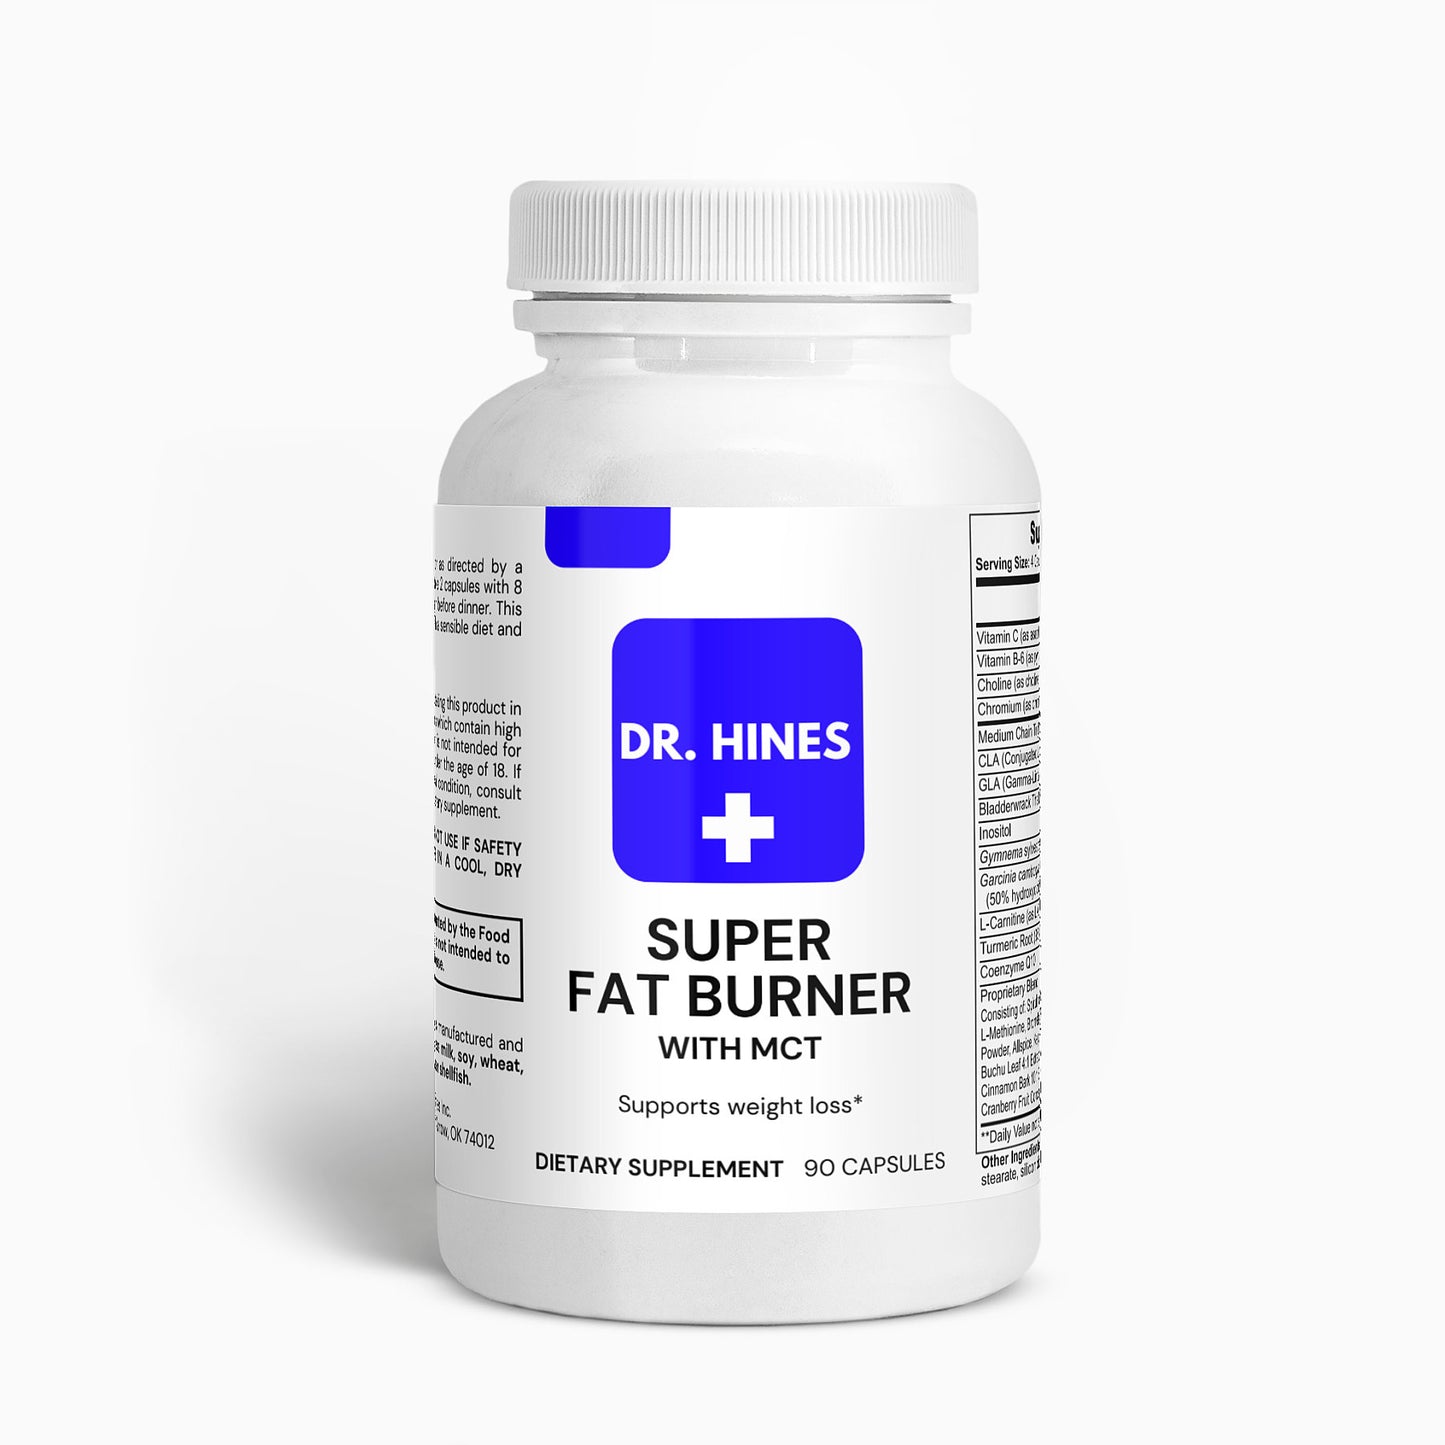 Dr. Hines Super Fat Burner with MCT